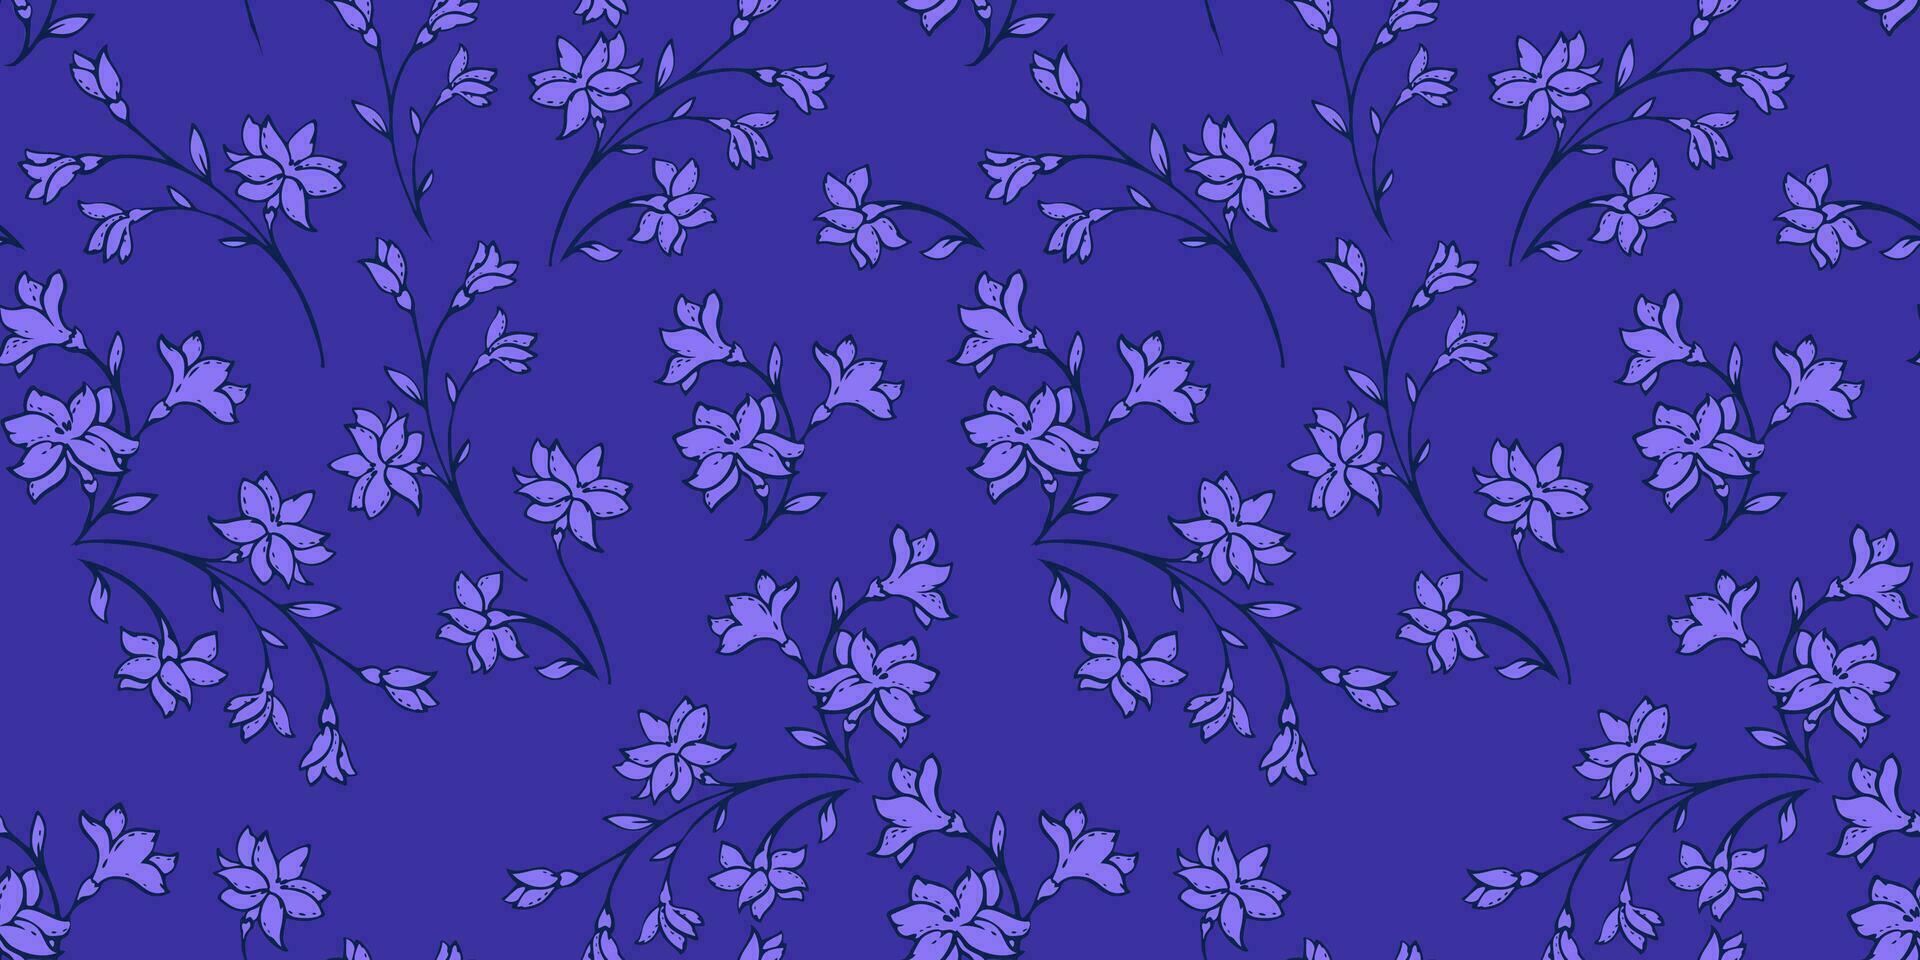 Seamless gentle tiny branches ditsy flowers pattern. Monotone bright blue wild floral background. Vector hand drawn sketch doodle. Template for design